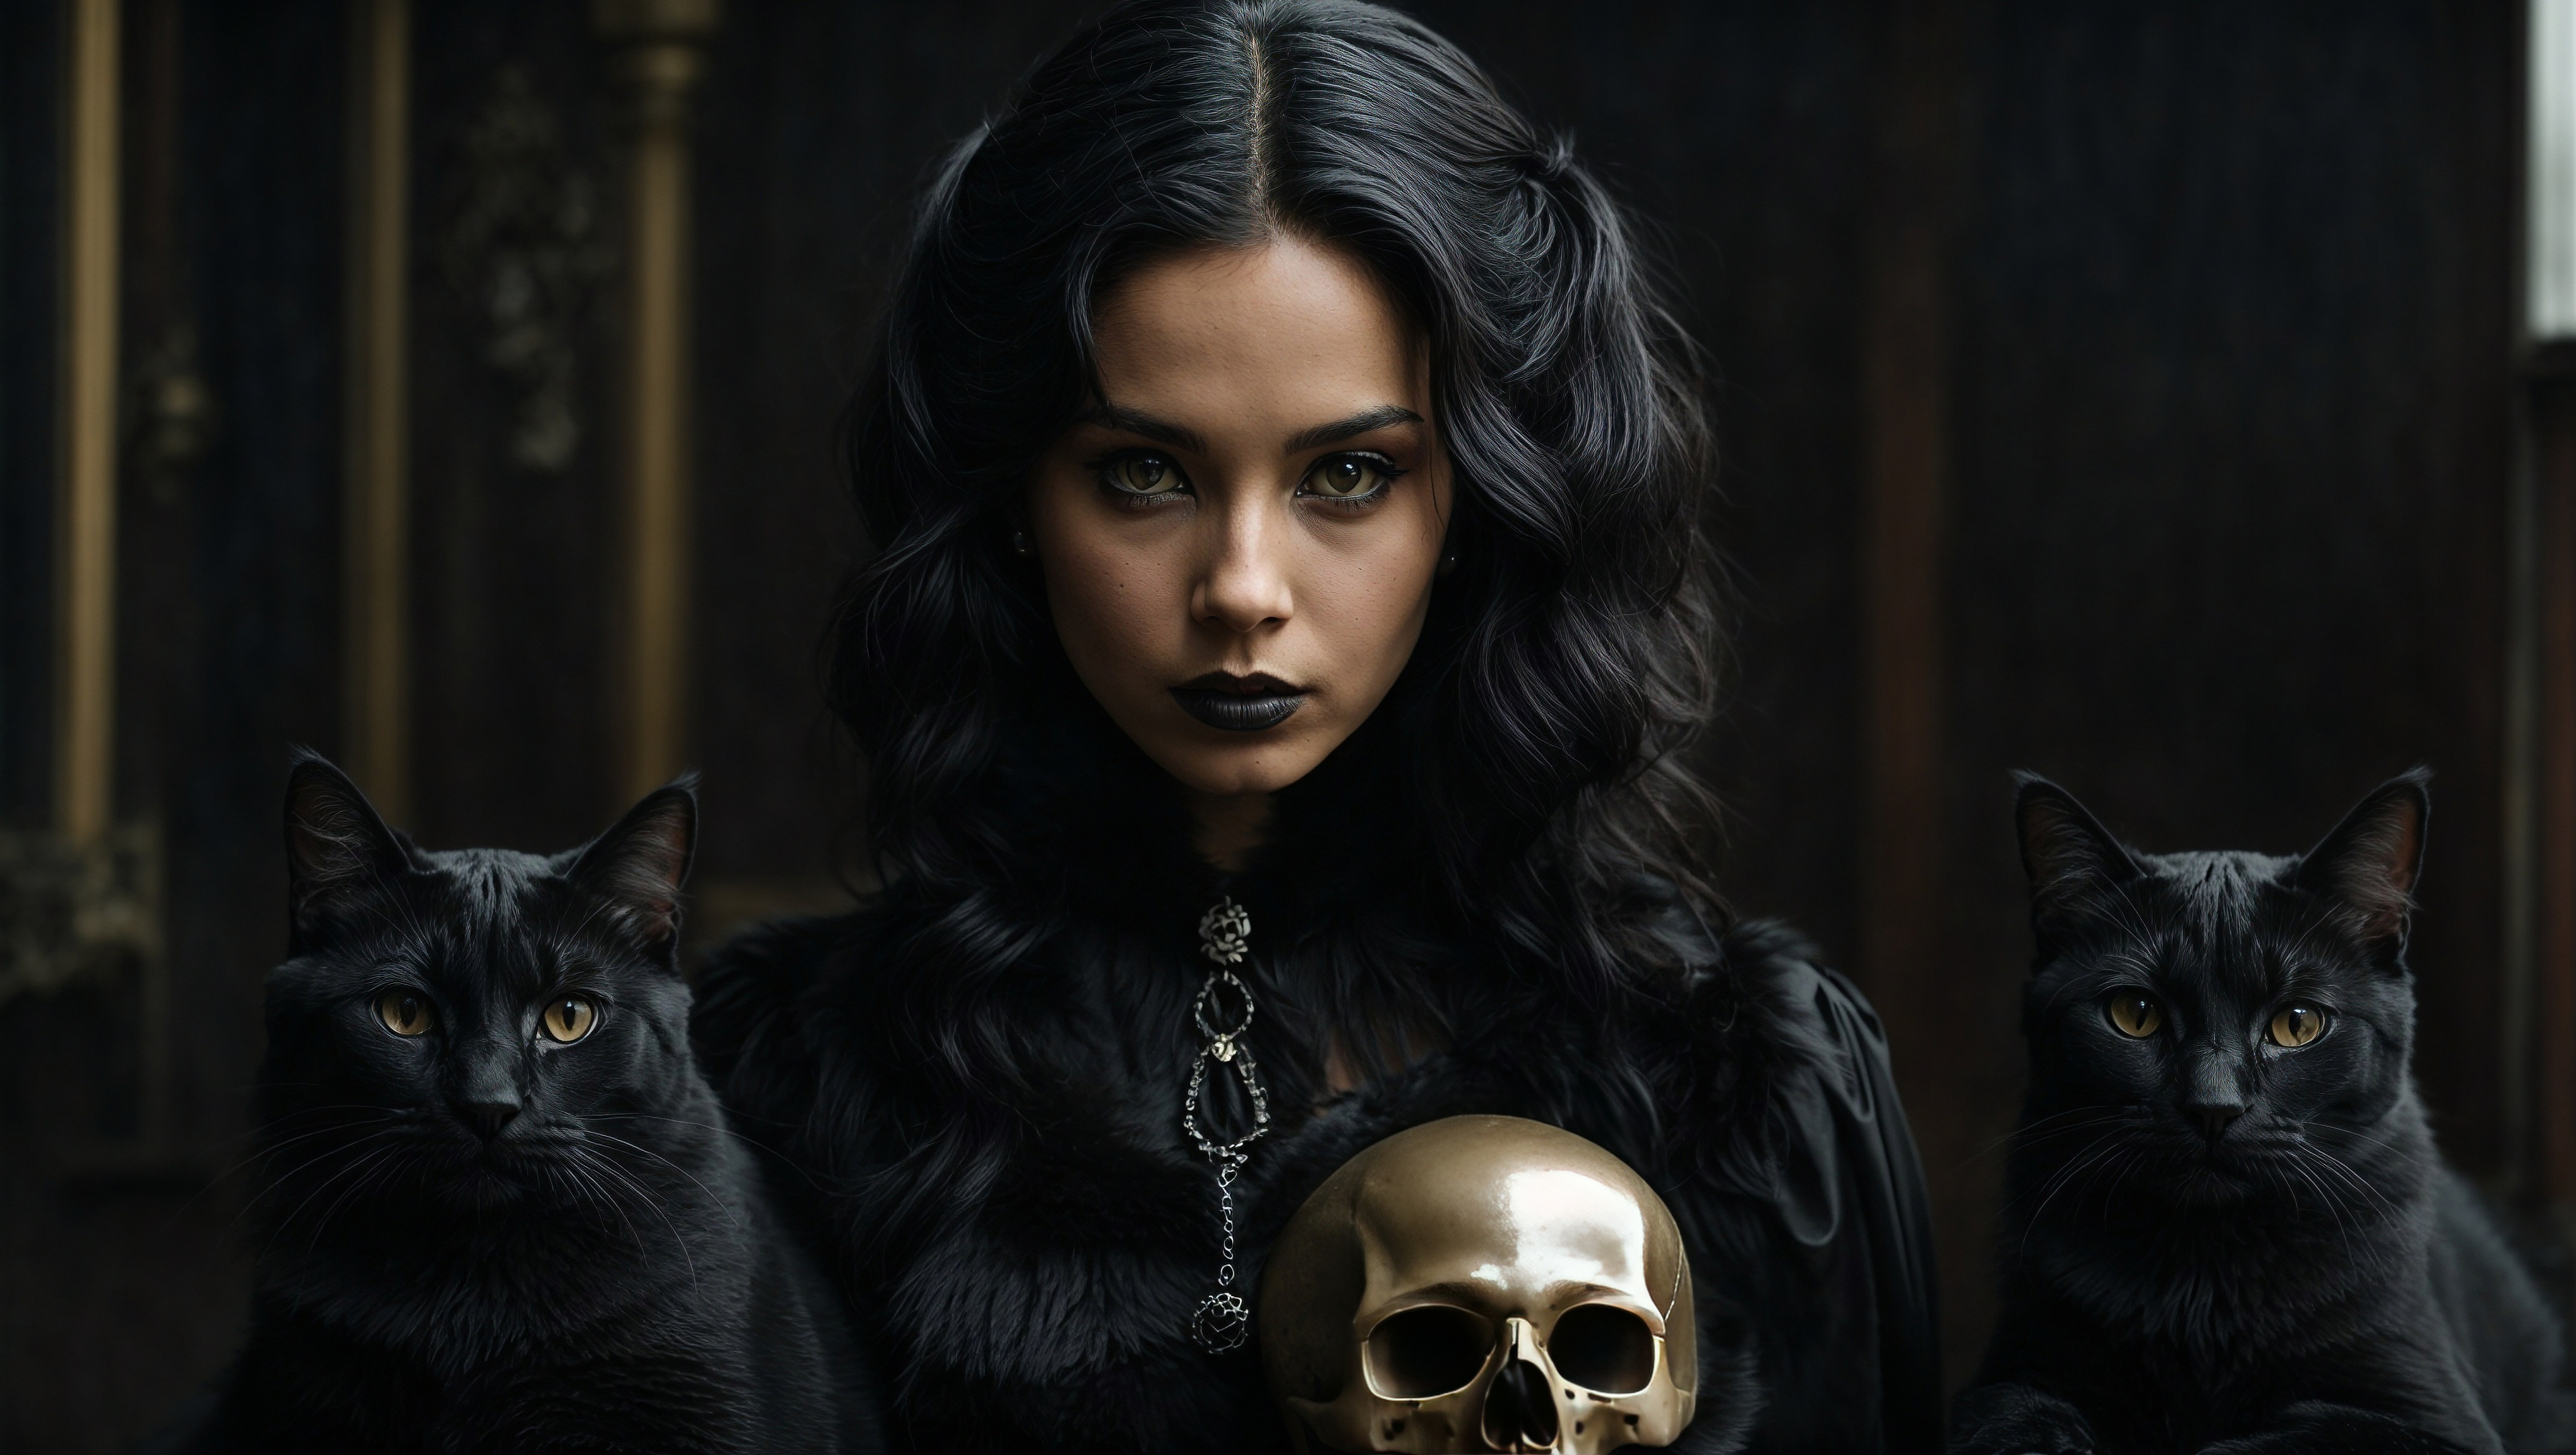 Free photo A woman is holding a gold skull, and three black cats